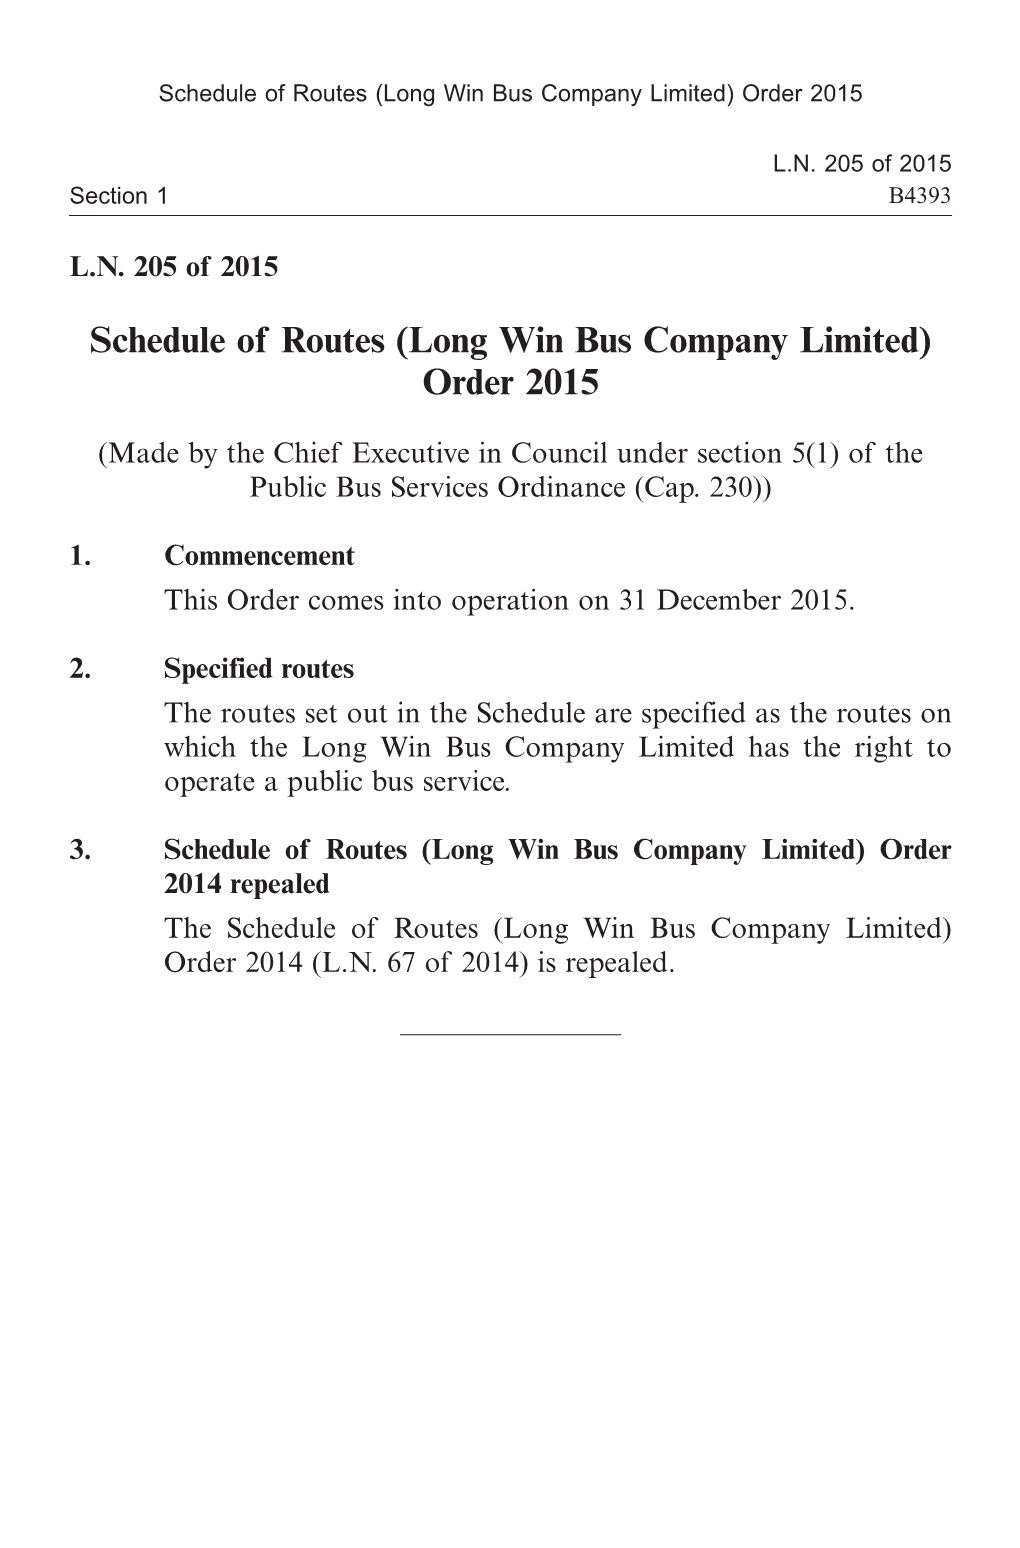 Schedule of Routes (Long Win Bus Company Limited) Order 2015